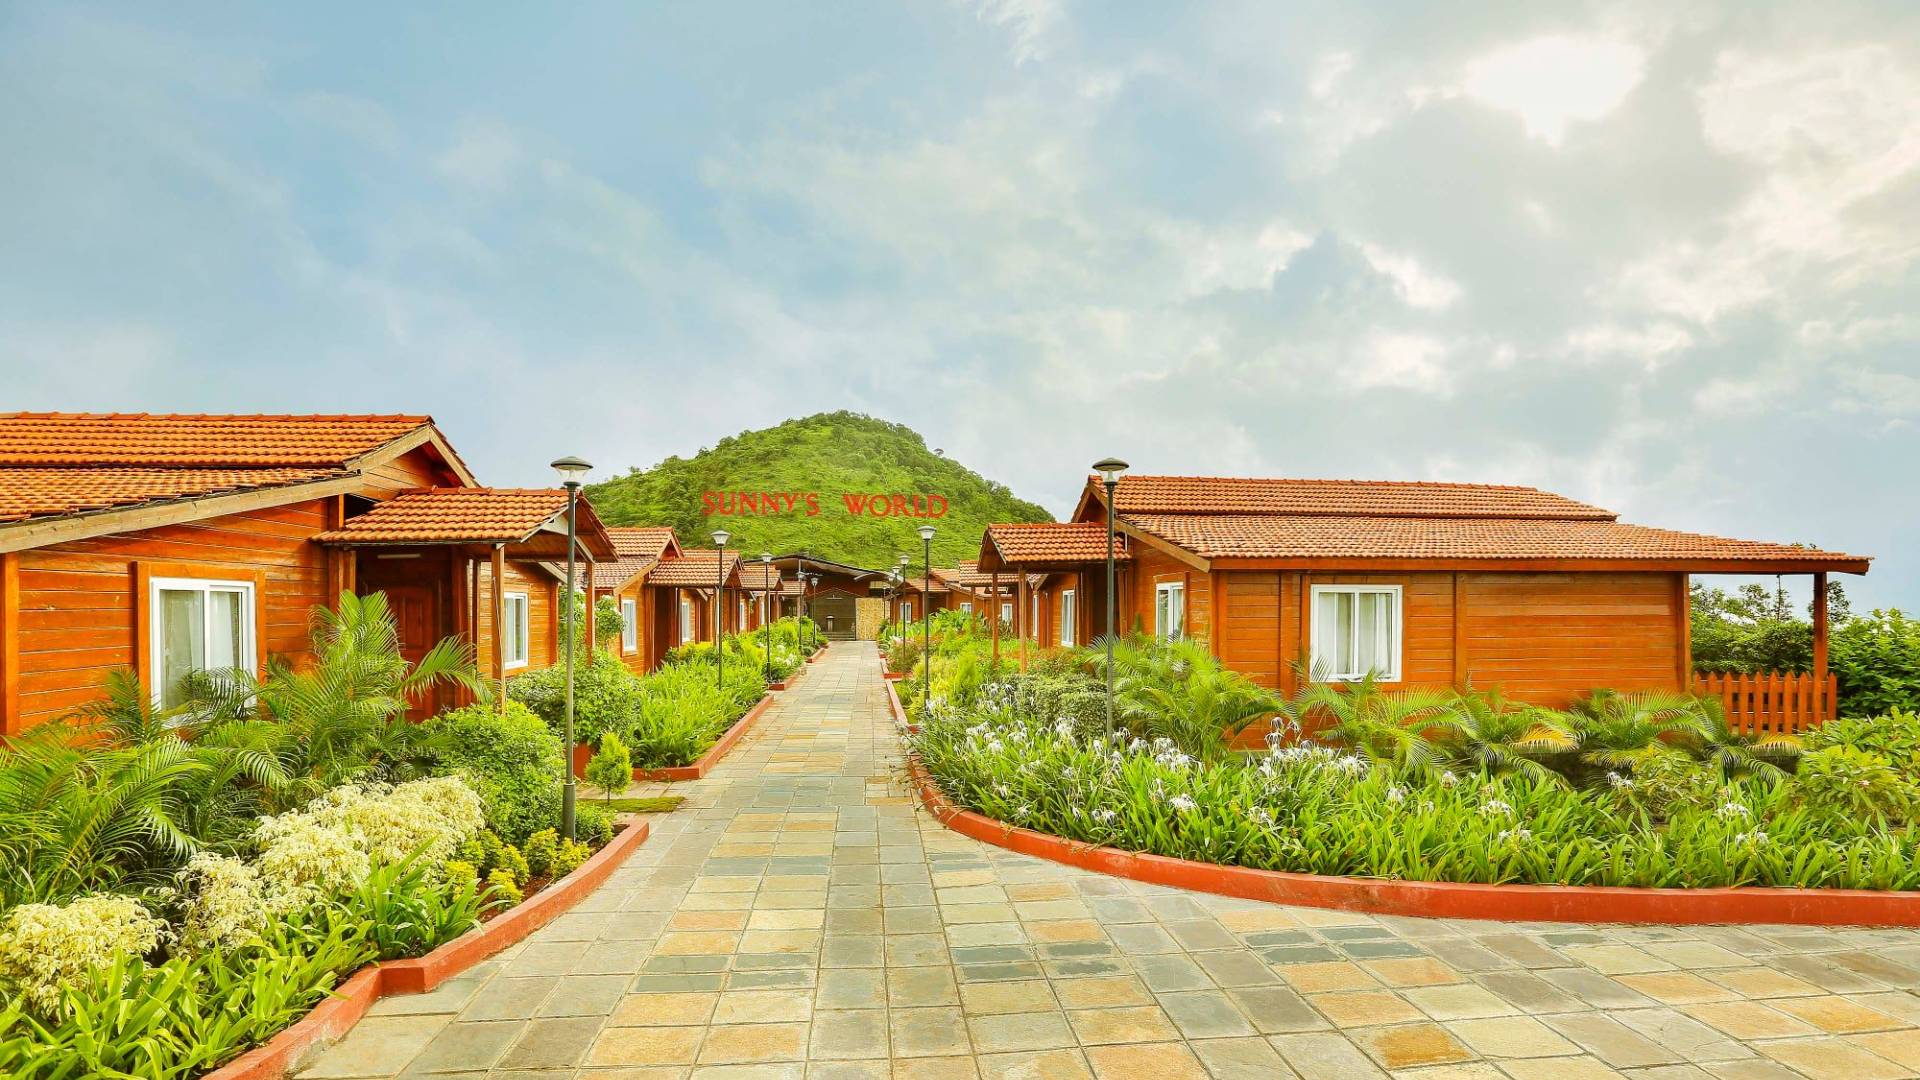 The Moonstone - Swiss Chalets at Sunny's World Pune (1)